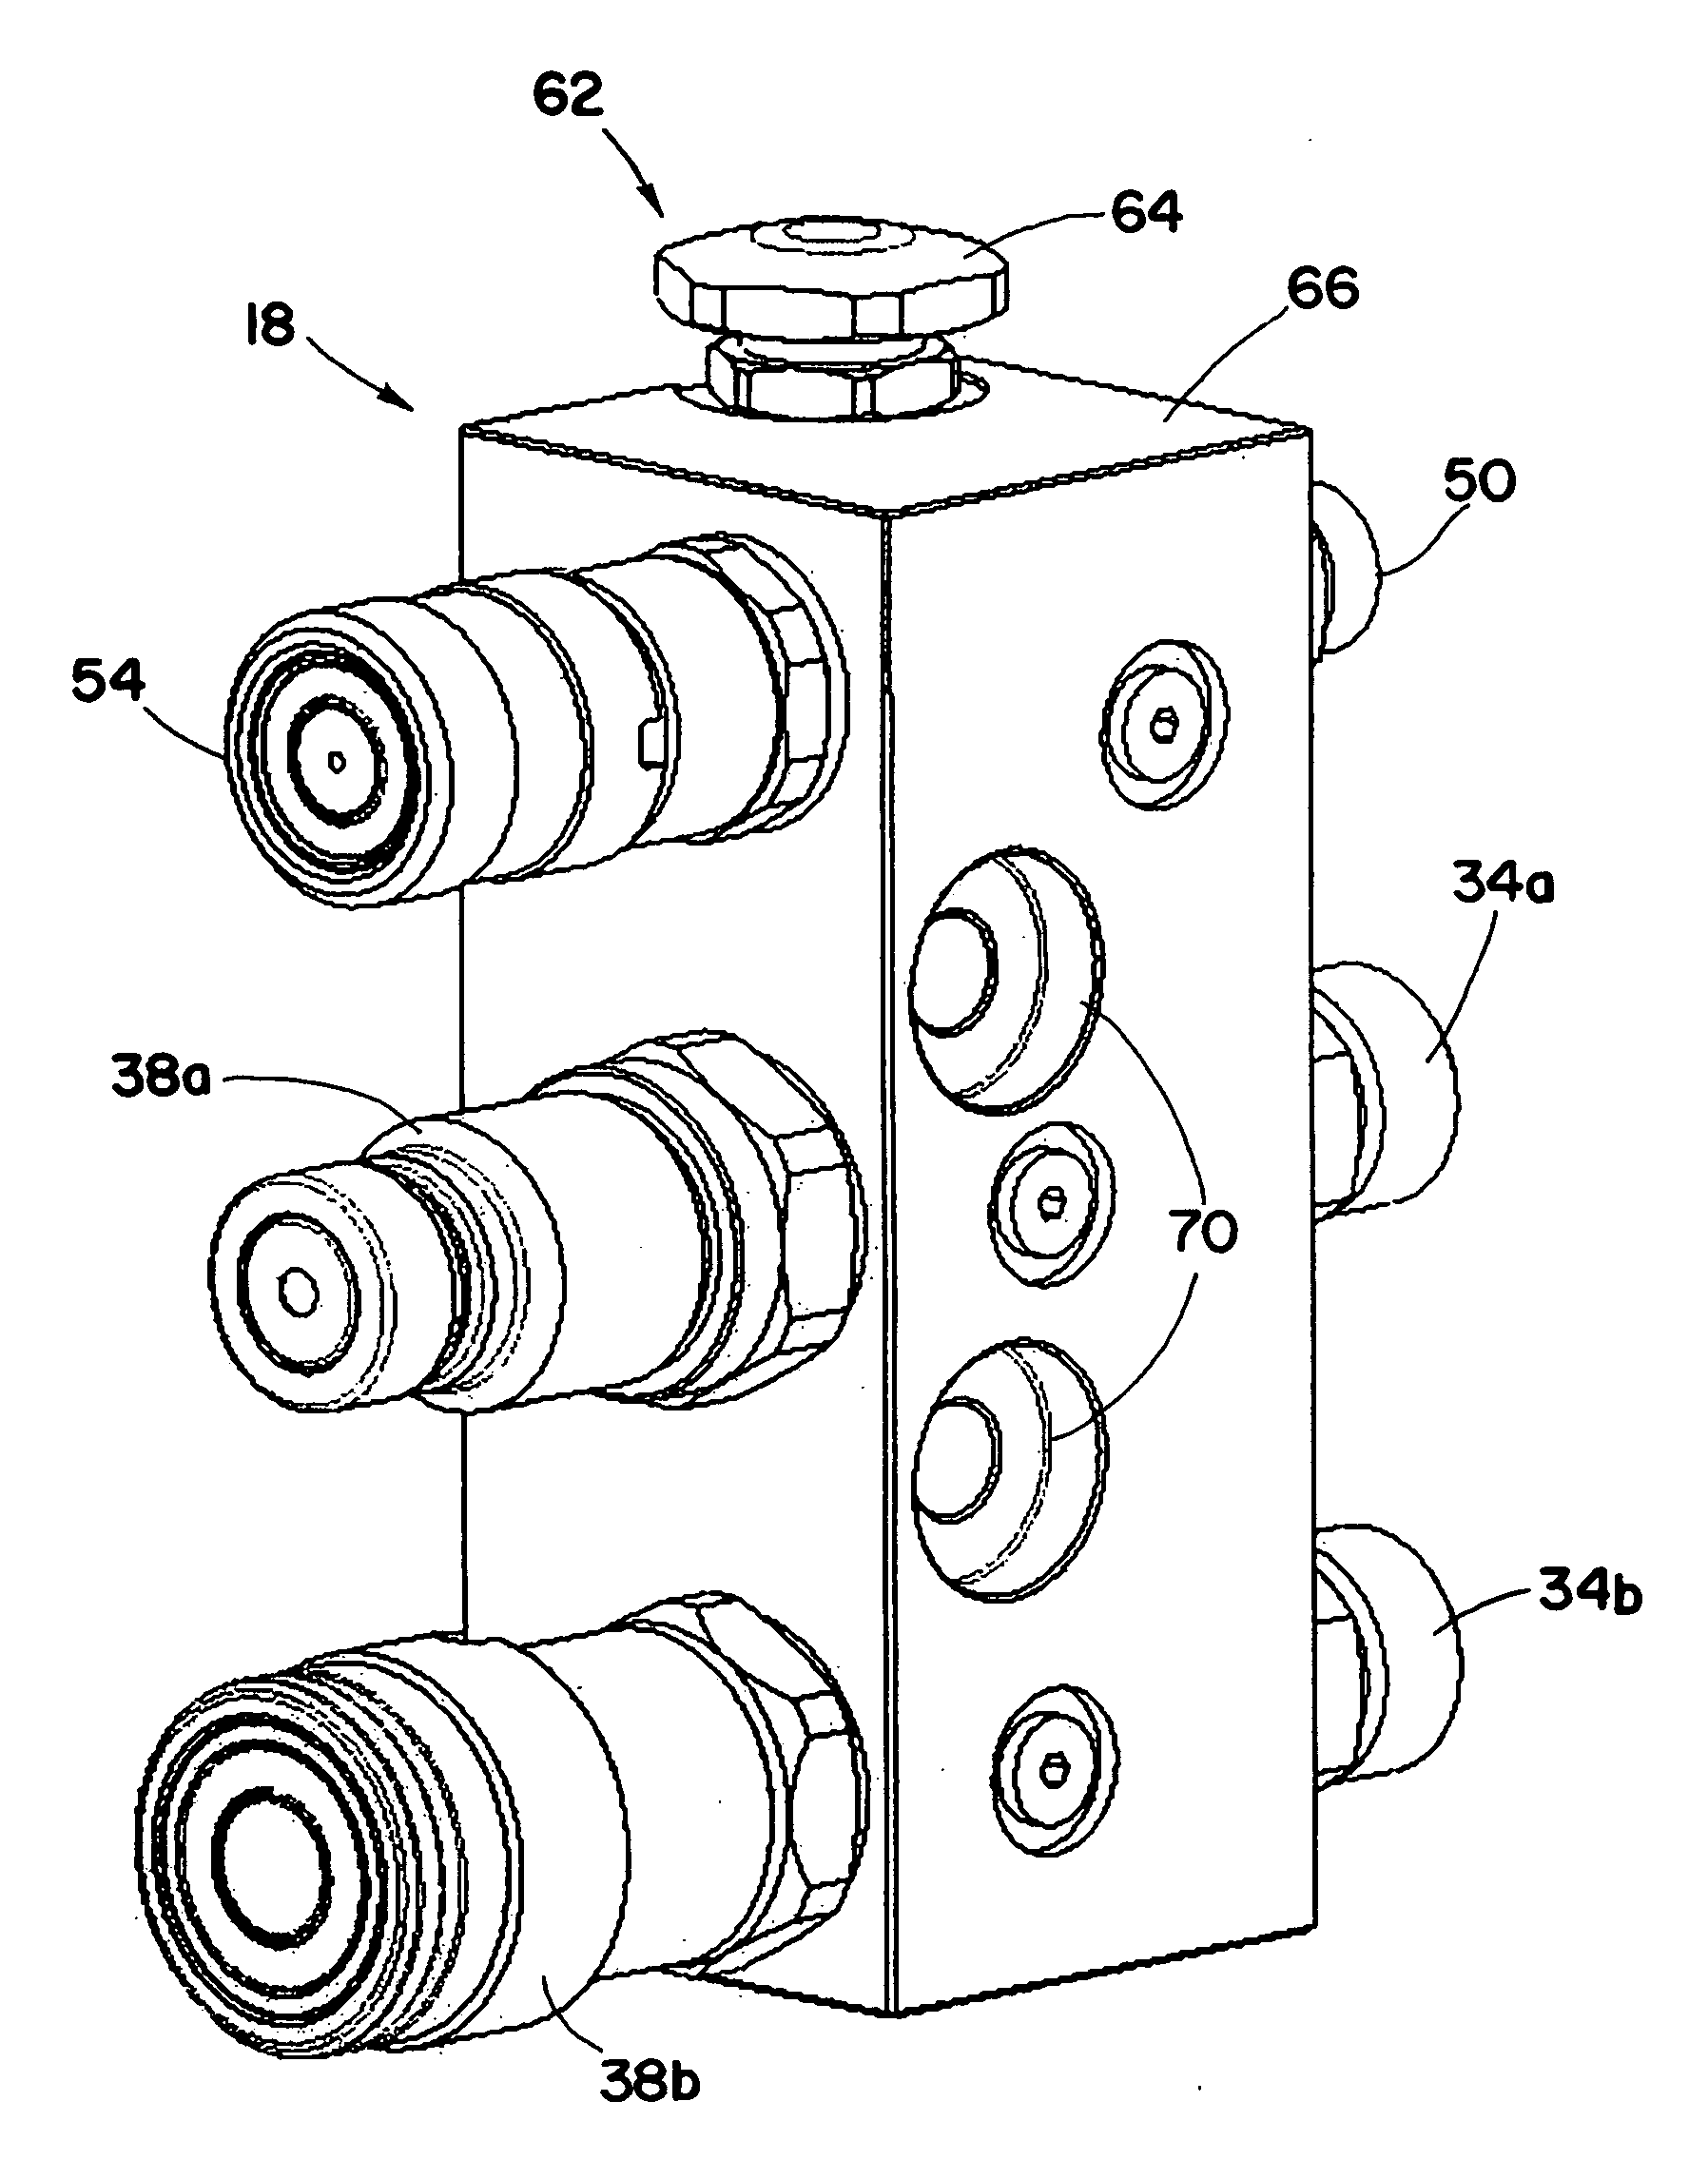 Pressure relieving coupler manifold with internal velocity fuse